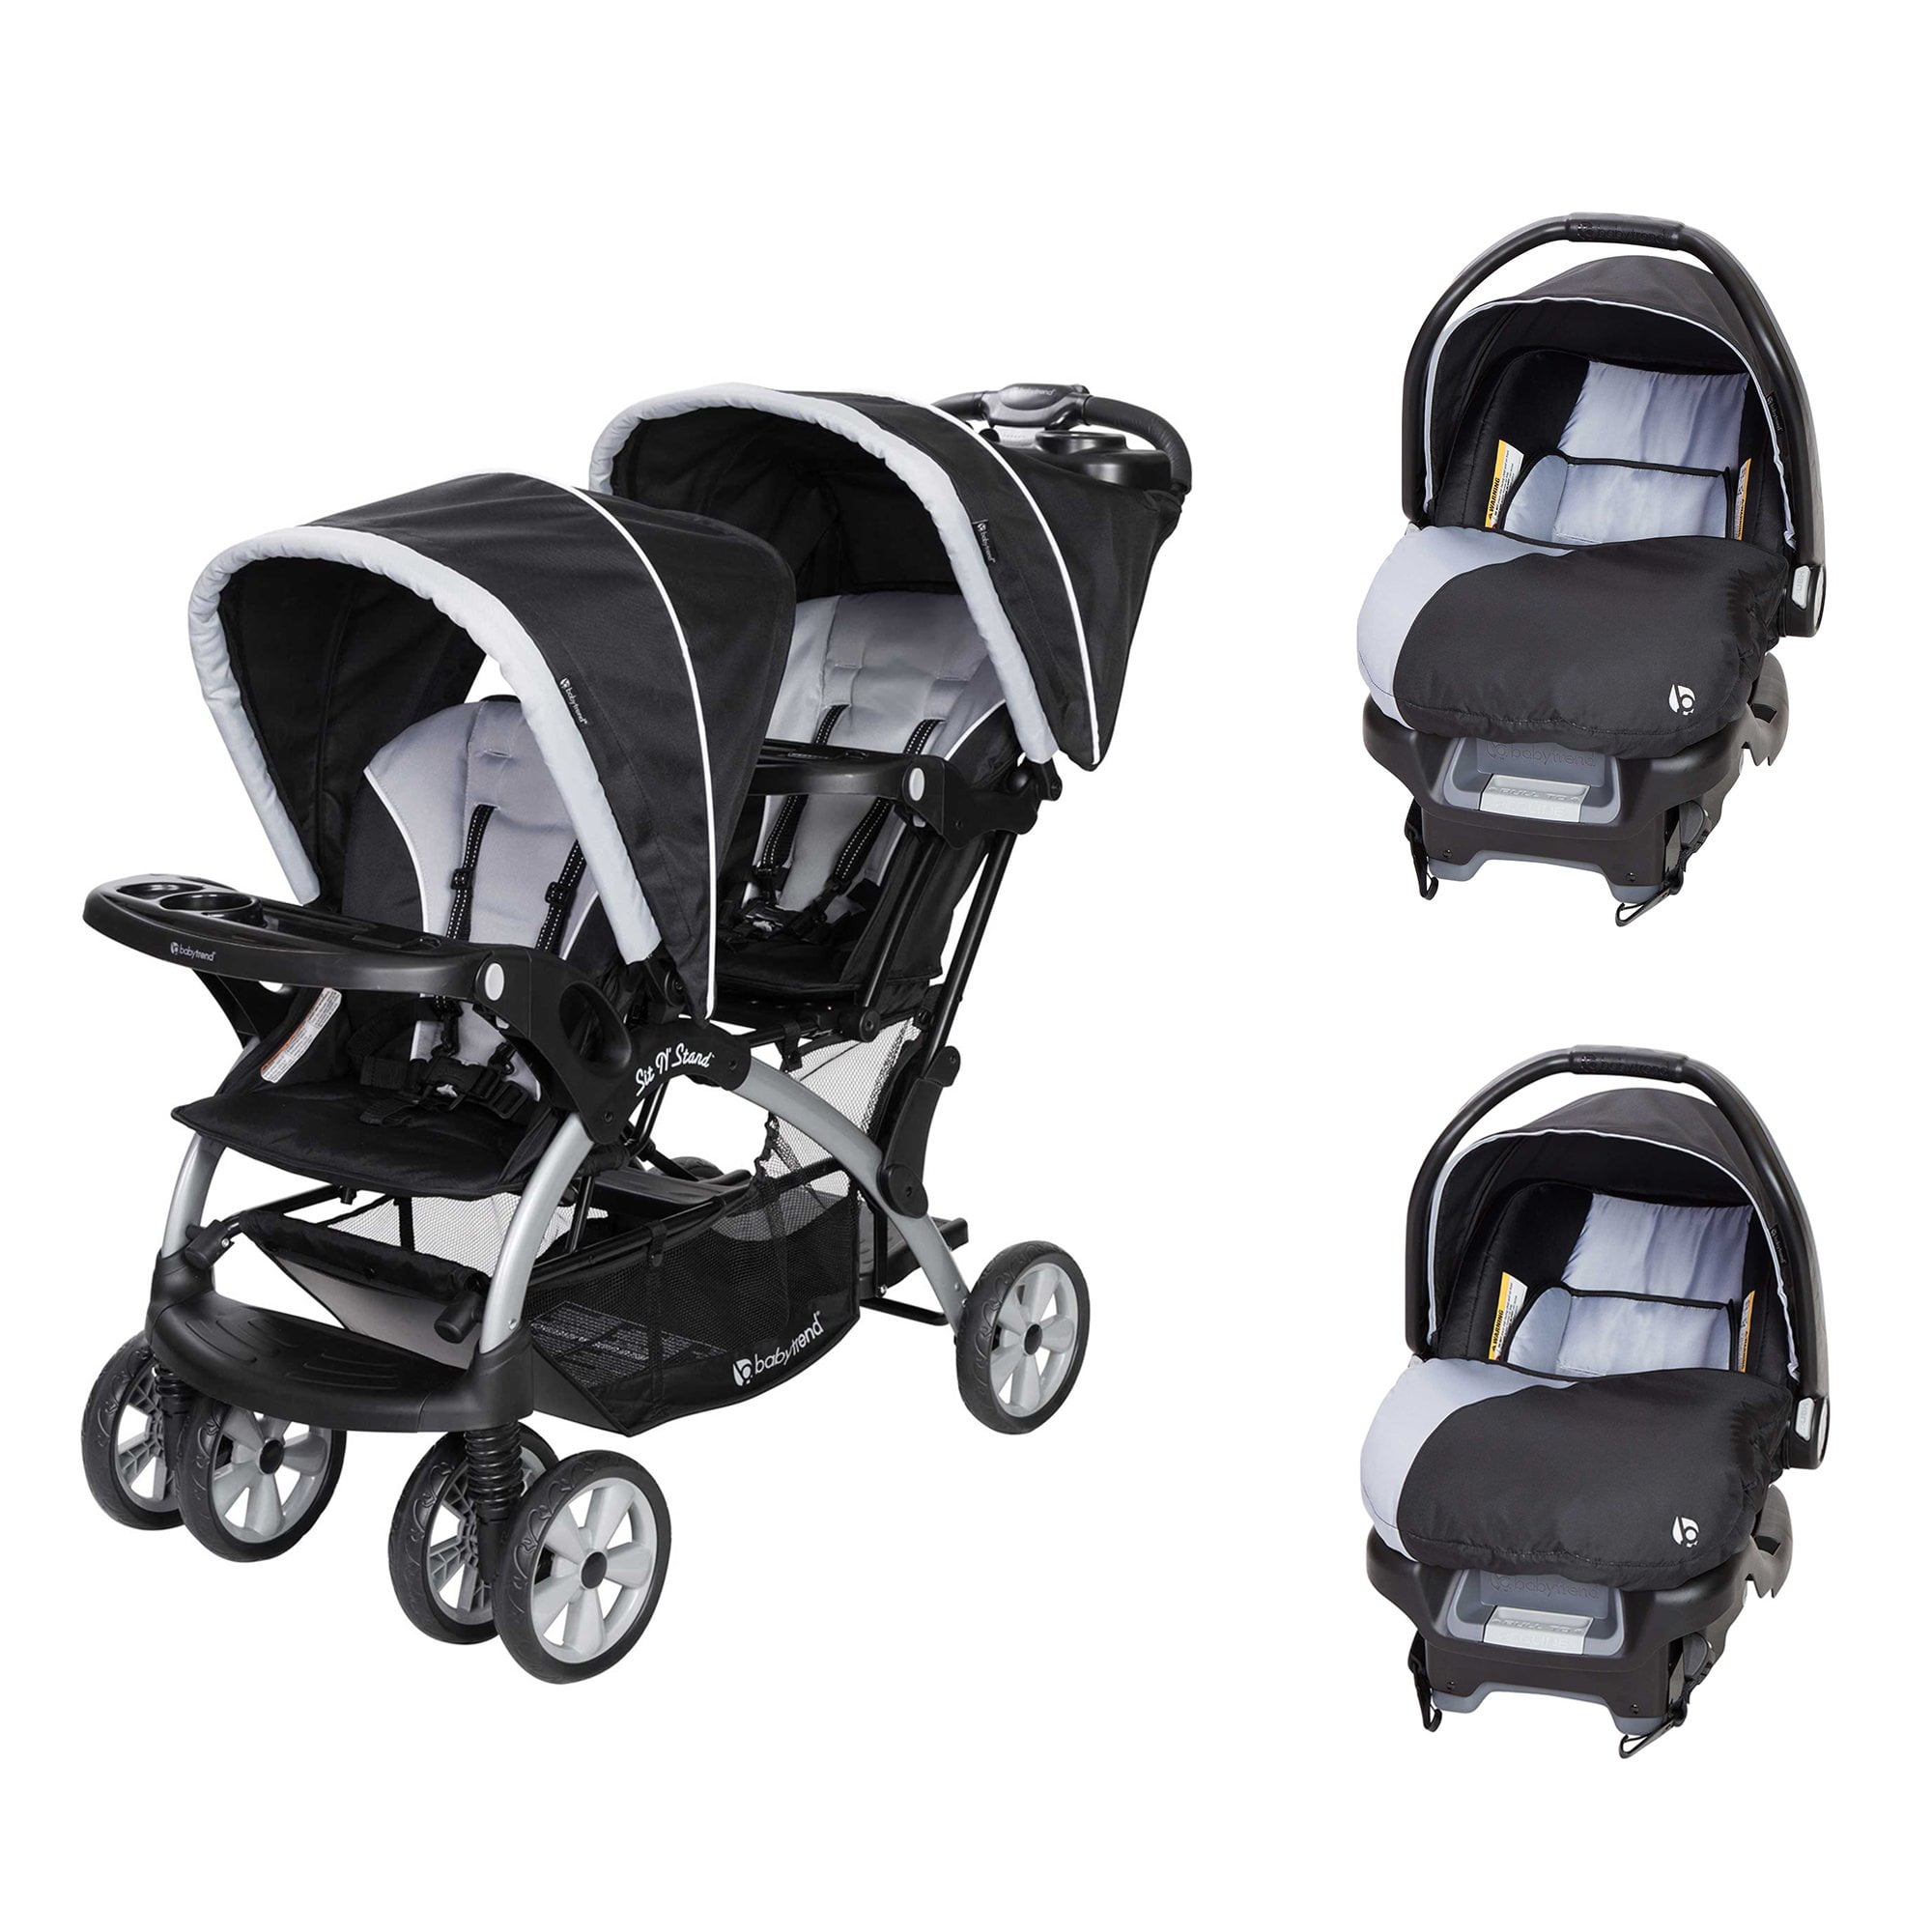 Stand Tandem Stroller Car Seats, Double Strollers With Car Seats Combo